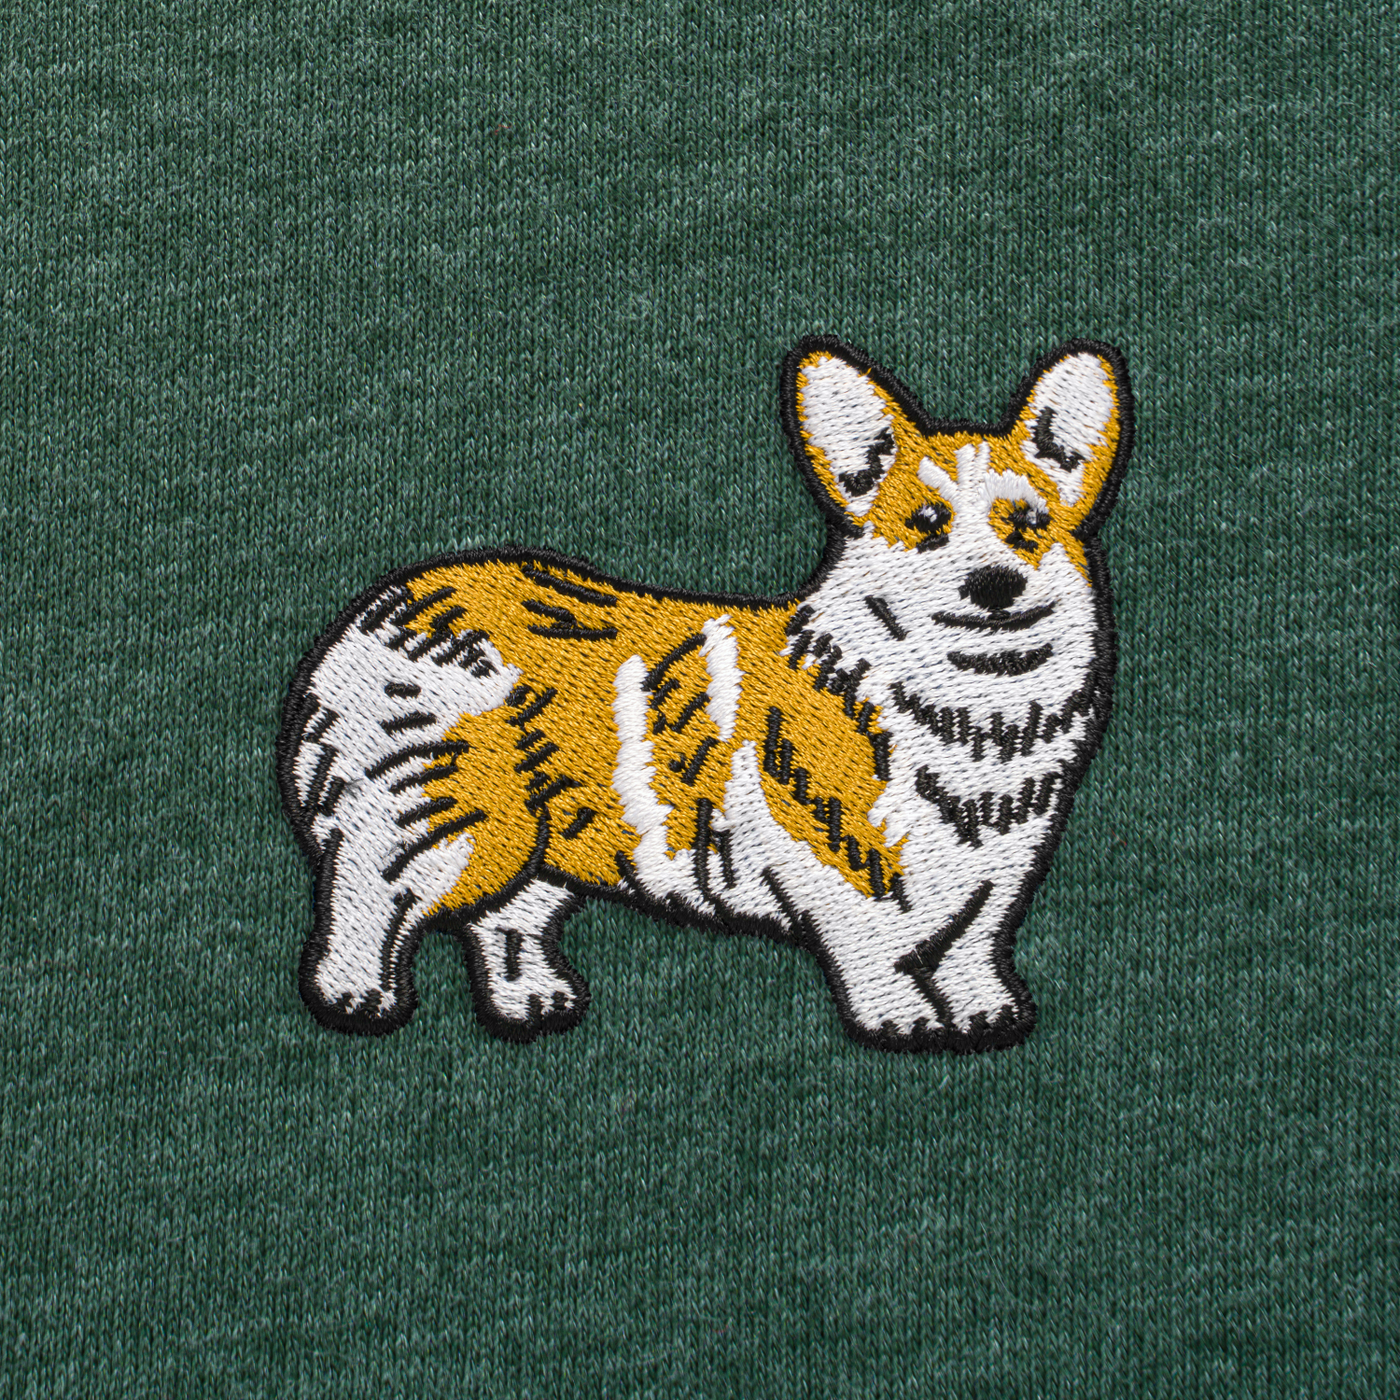 Bobby's Planet Men's Embroidered Corgi T-Shirt from Paws Dog Cat Animals Collection in Heather Forest Color#color_heather-forest